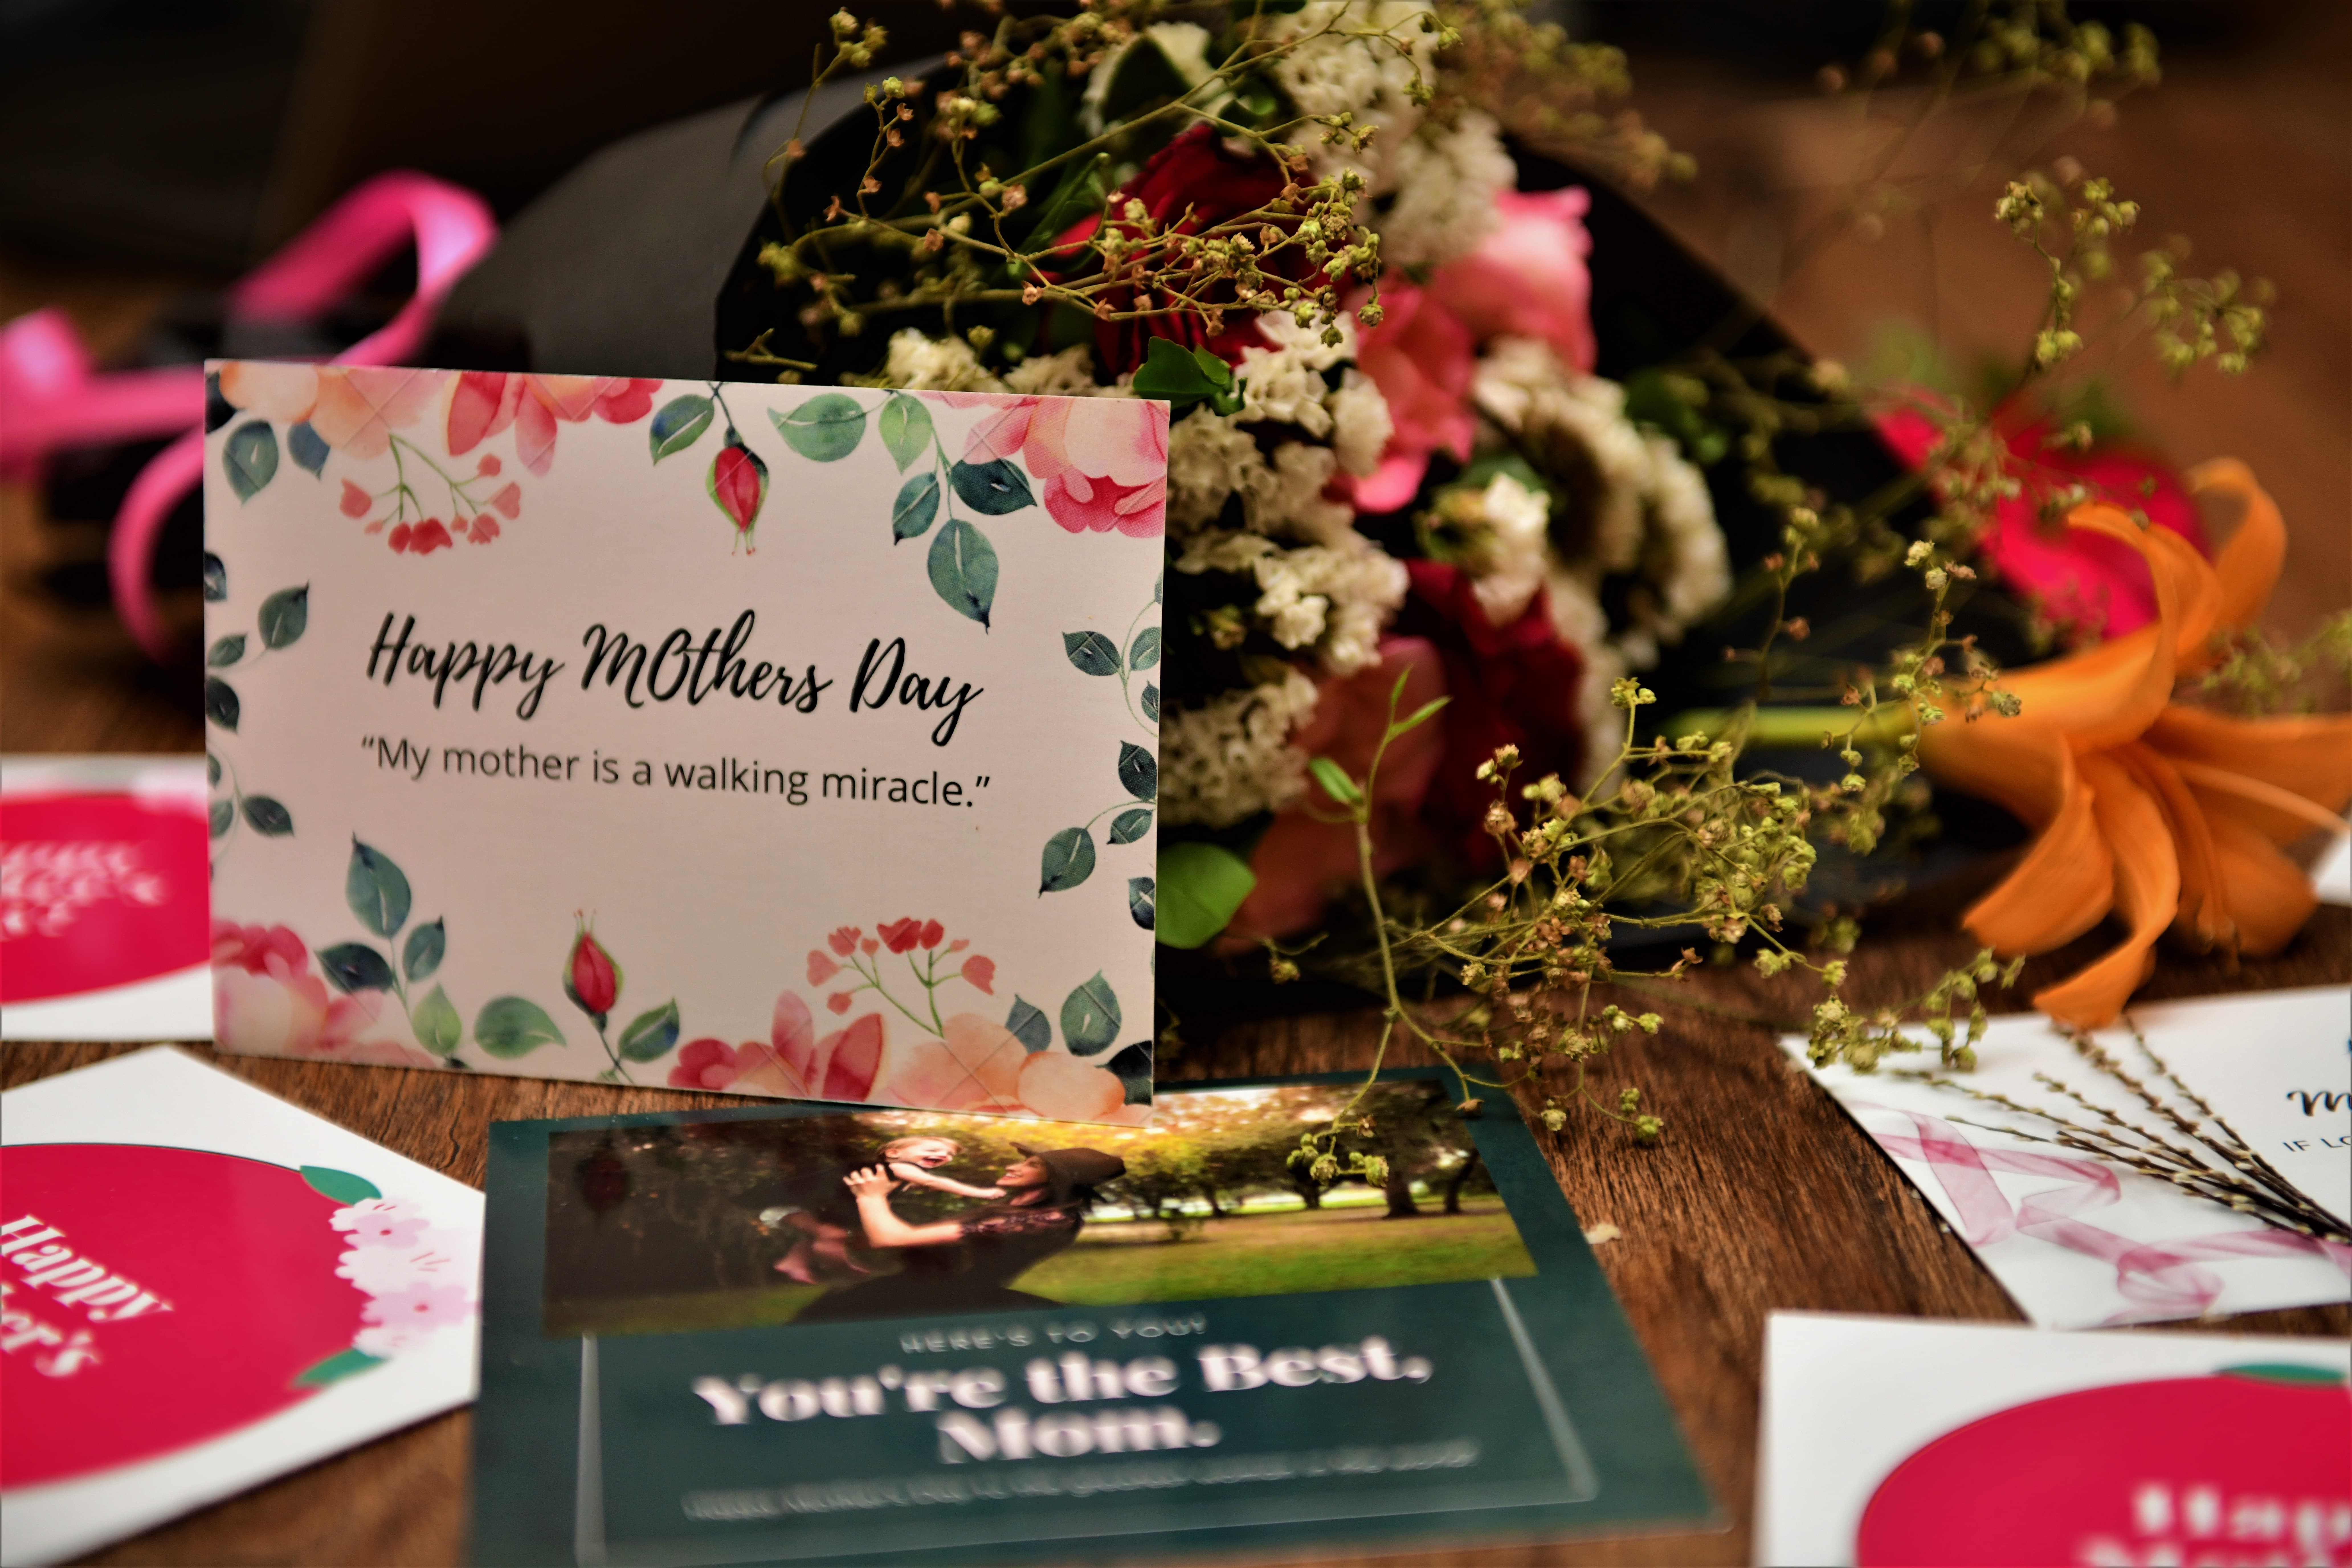 An assortment of Mother's Day cards and decorations